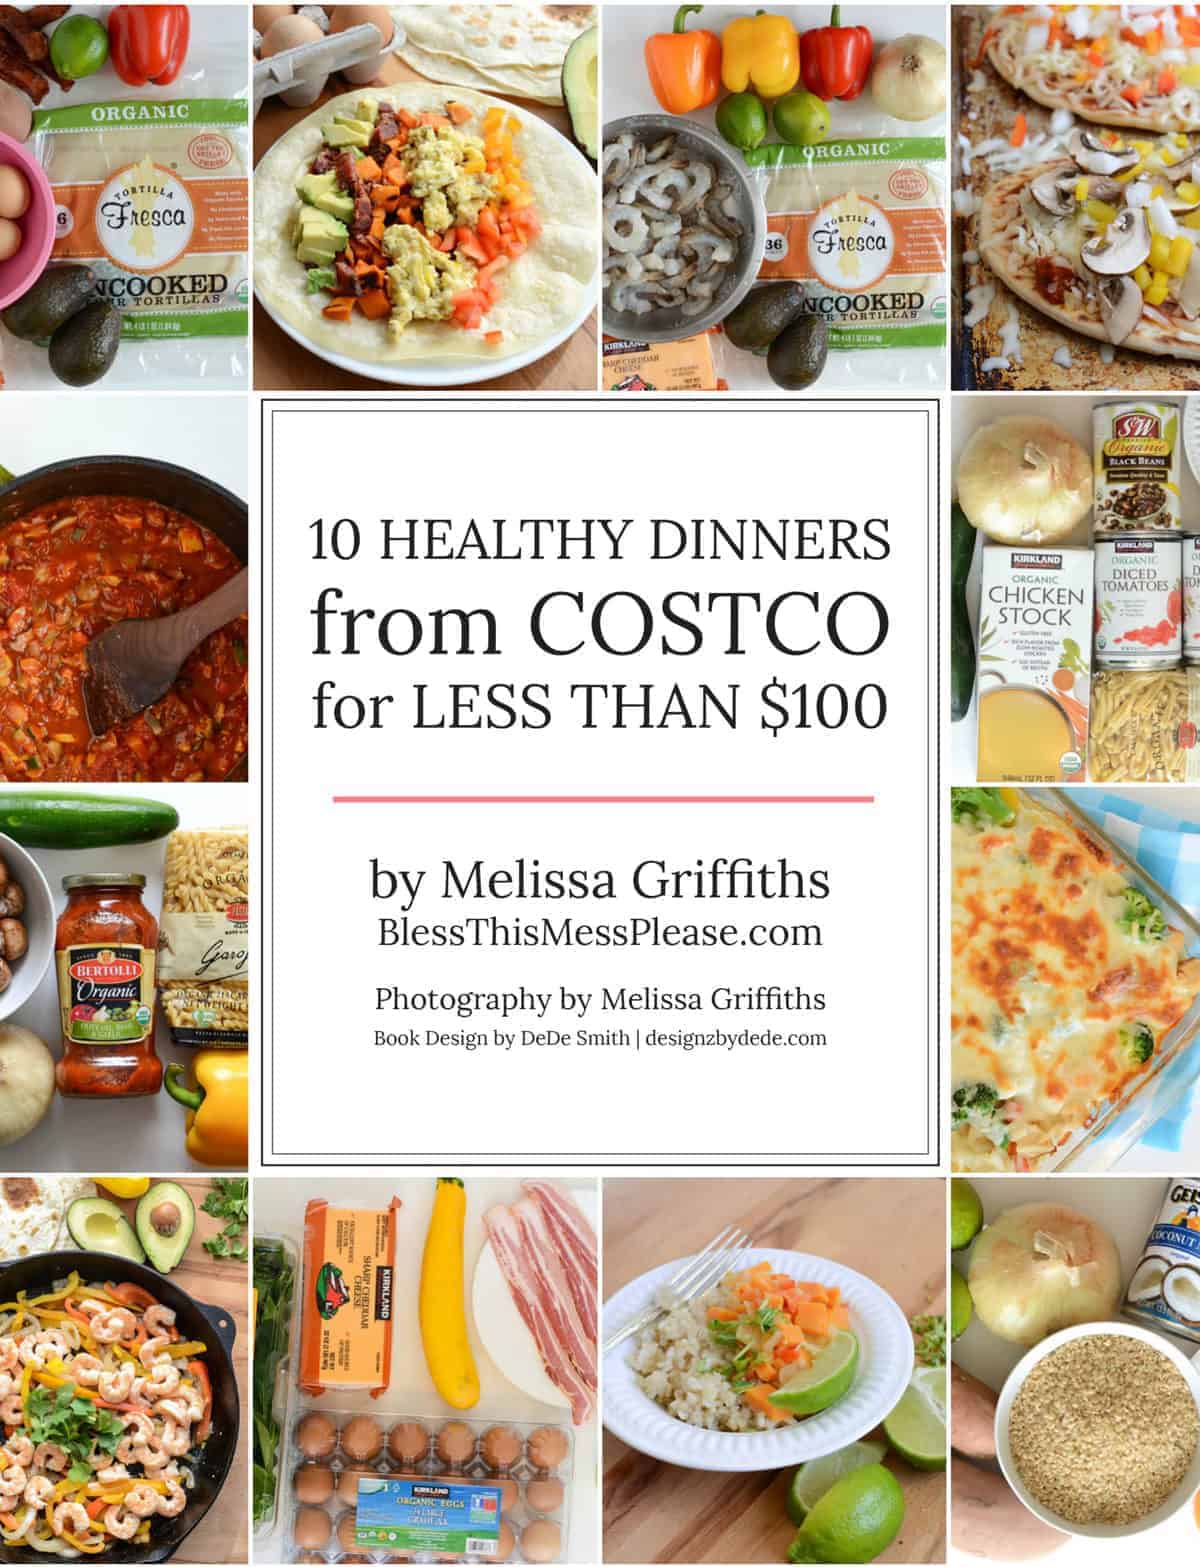 10 Healthy Dinners from Costco for Less Than $100